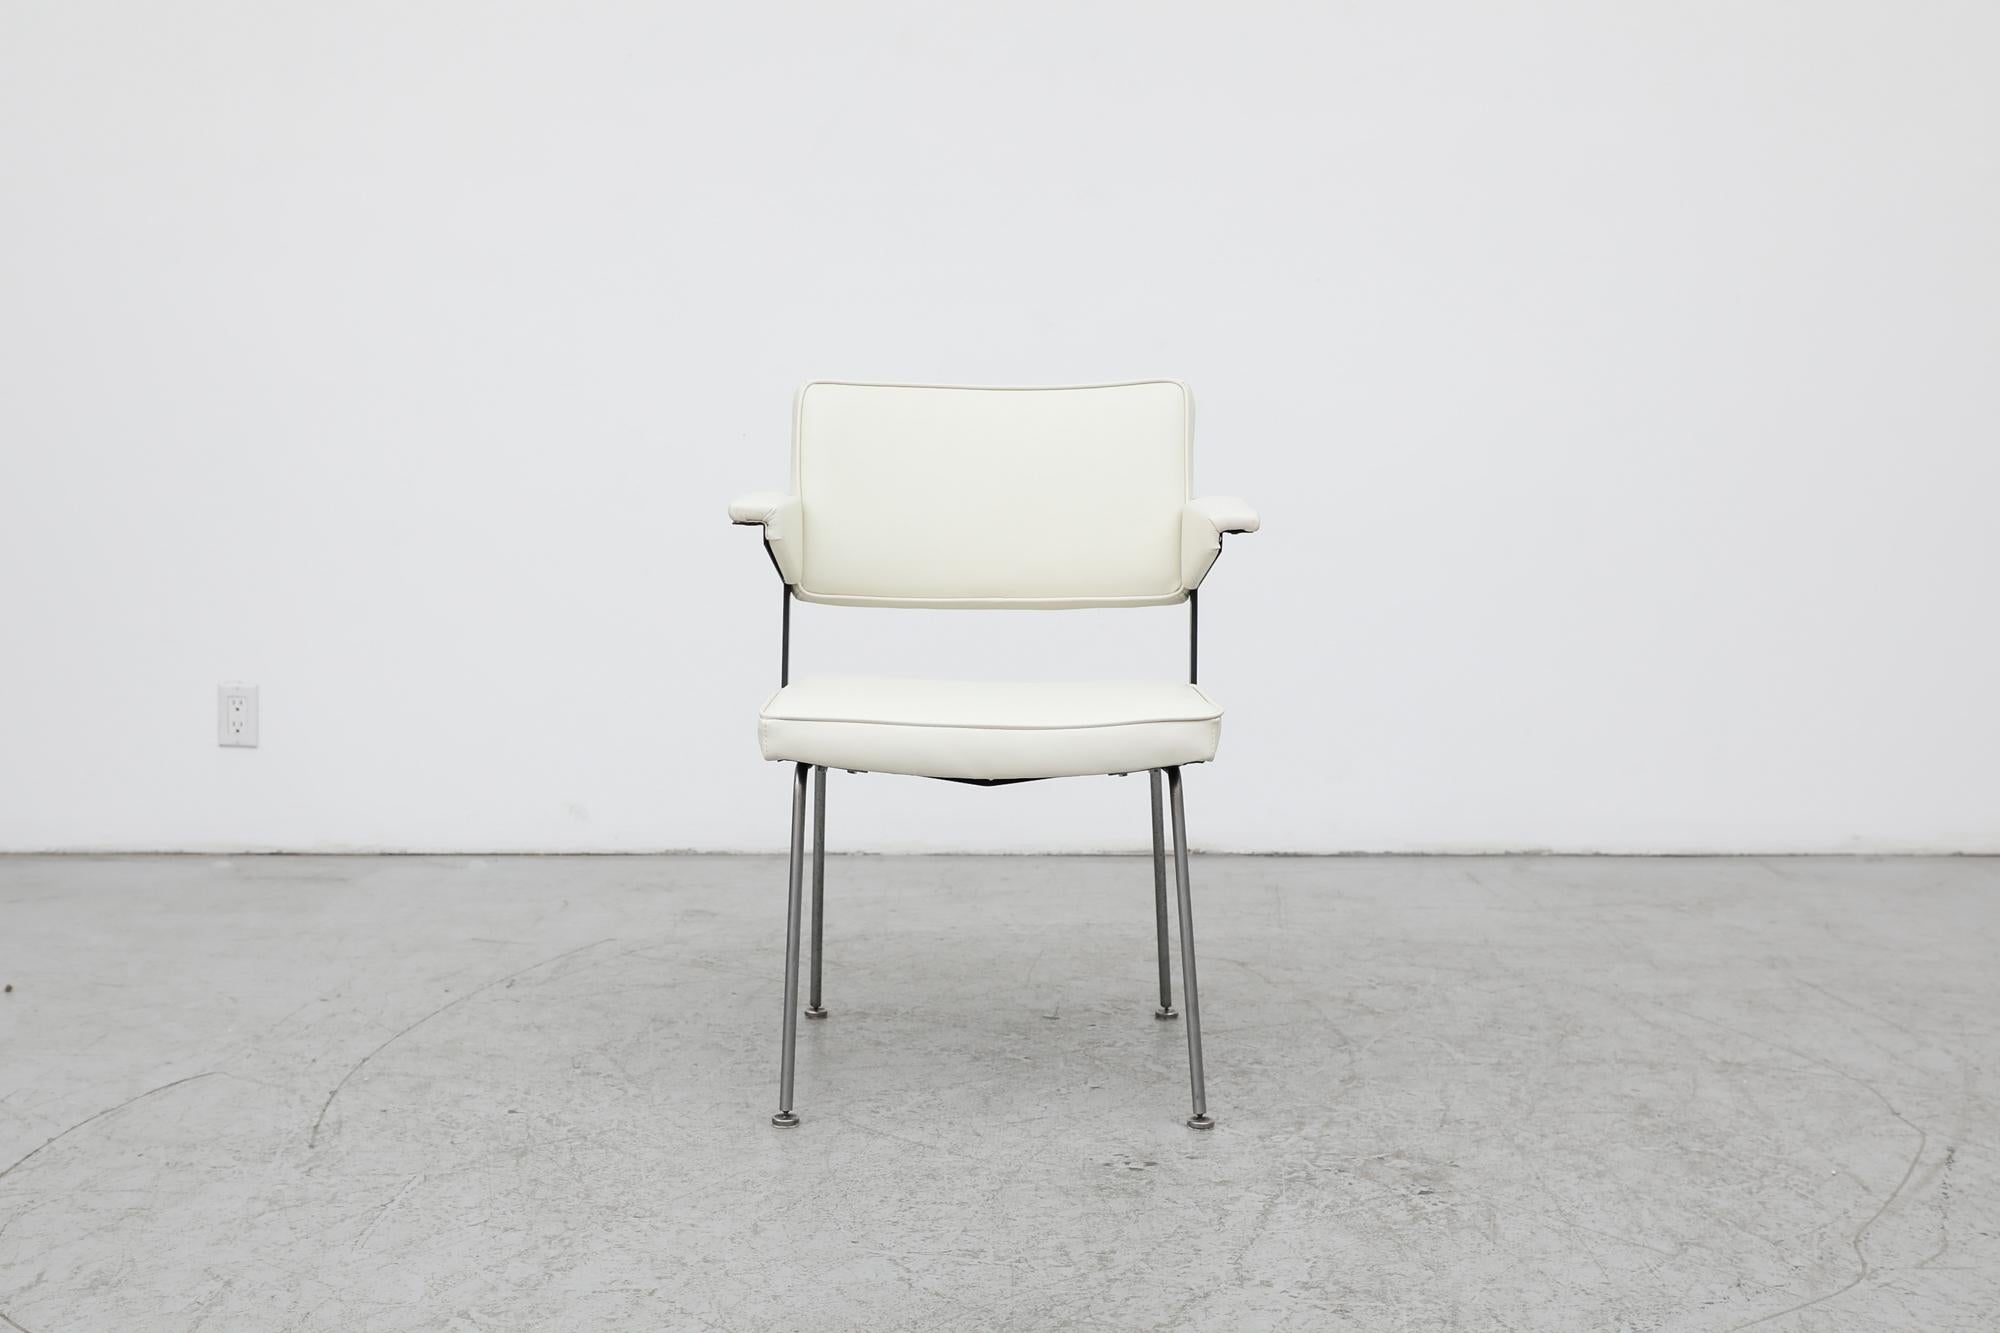 Gispen No.11 armchair with new ivory vintage vinyl upholstery on a wide body frame. The chair has beautiful Prouve style armrests on a black enameled metal frame with tubular brushed steel legs. In otherwise original condition with wear consistent